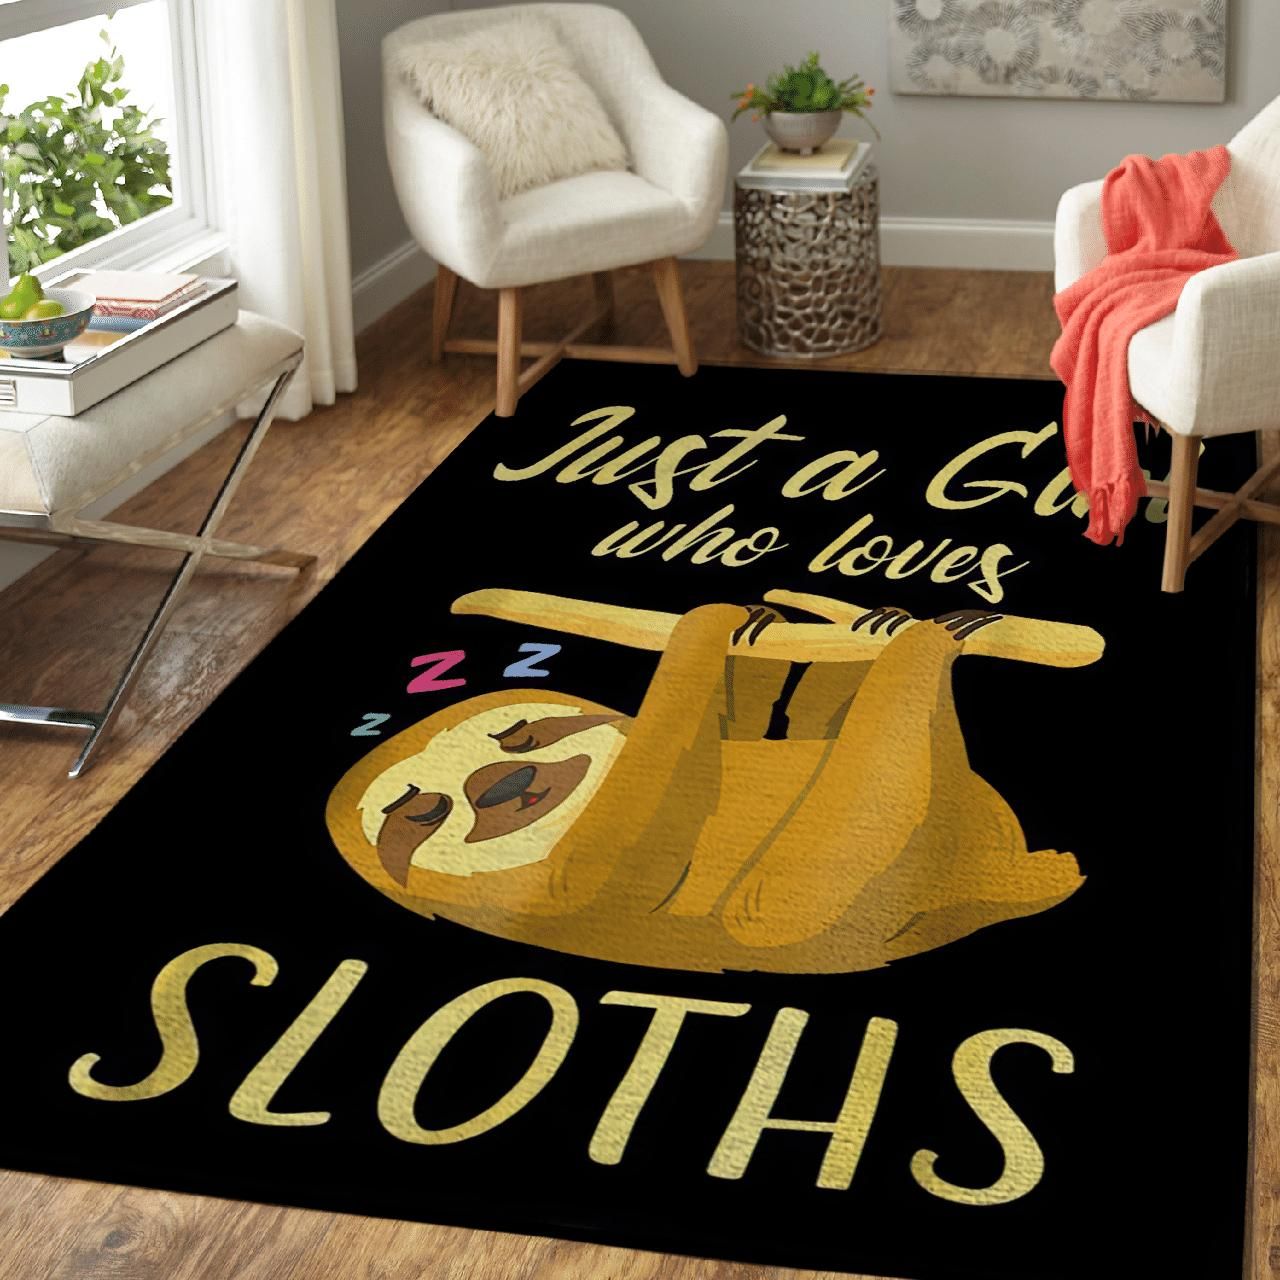 Just A Girl Who Loves Sloths Sleeping Area Rug